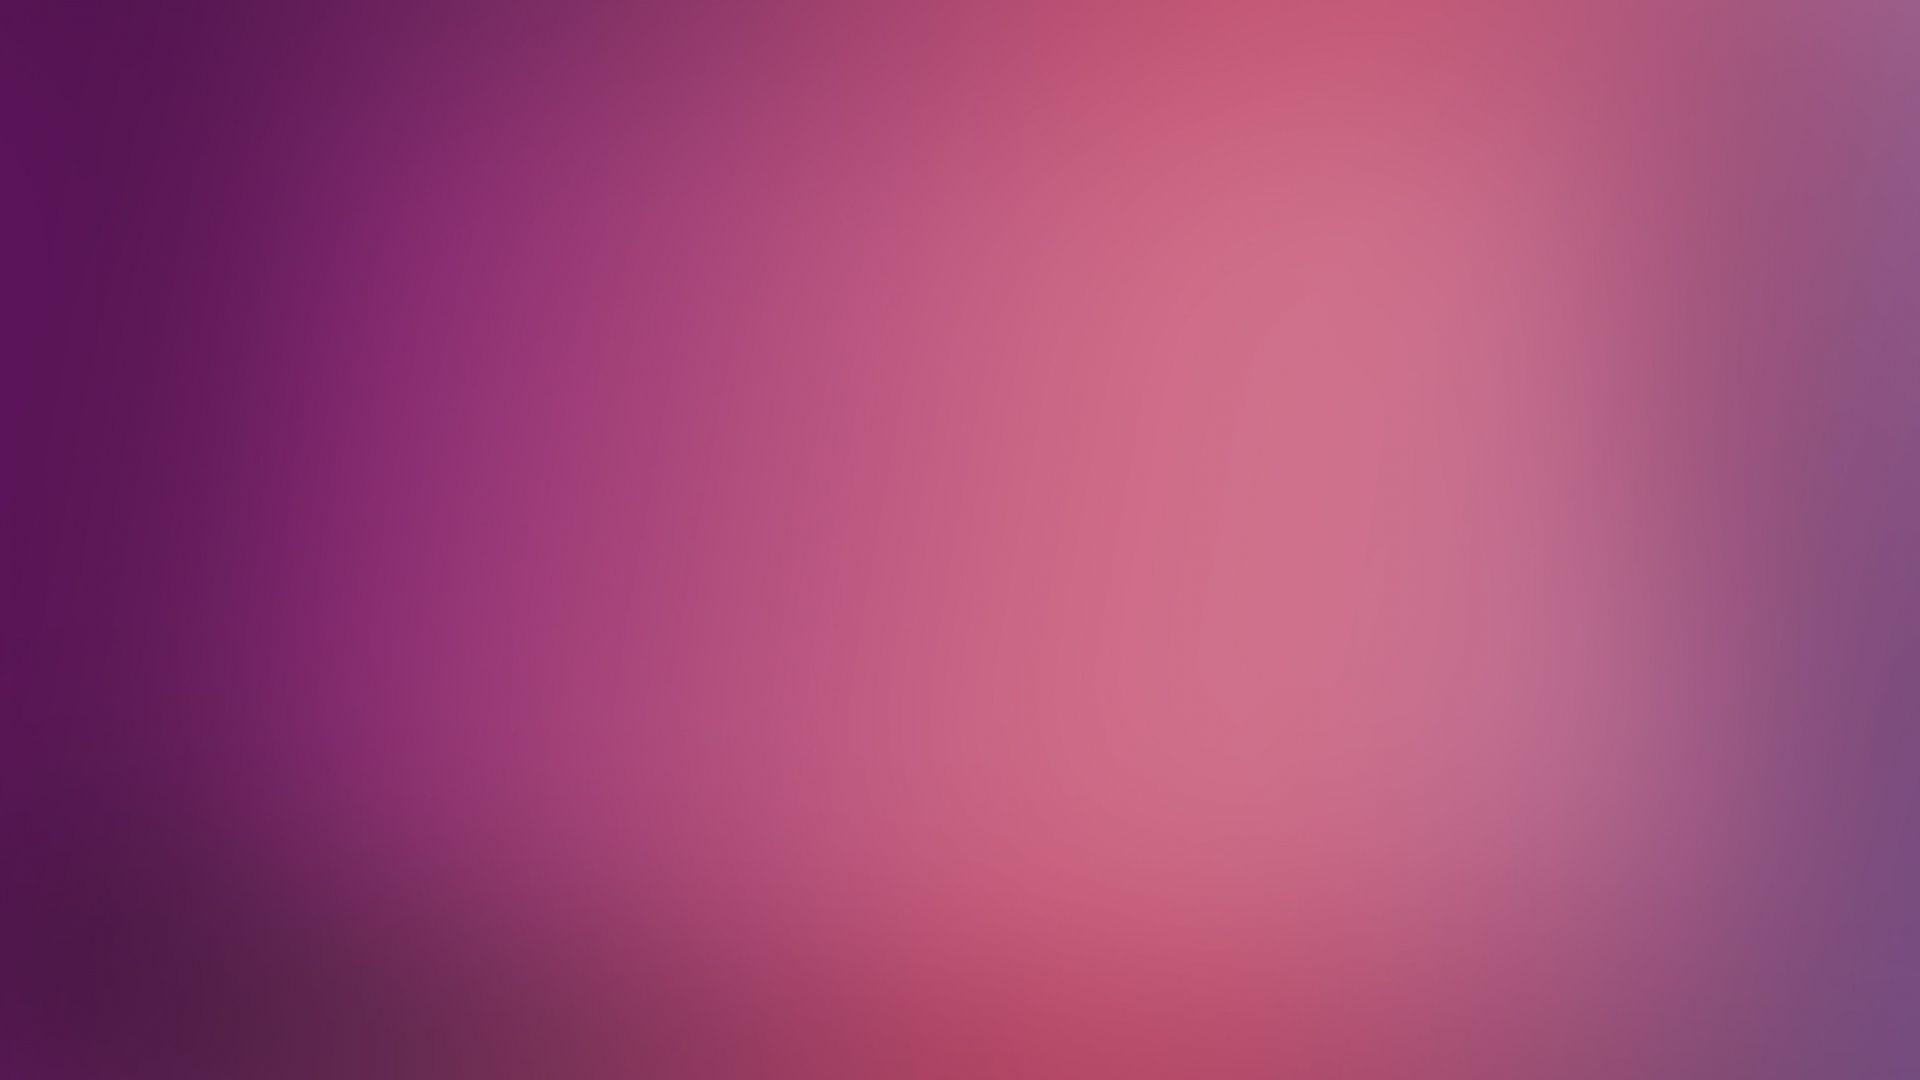 Plain Background Solid Bright Wallpaper